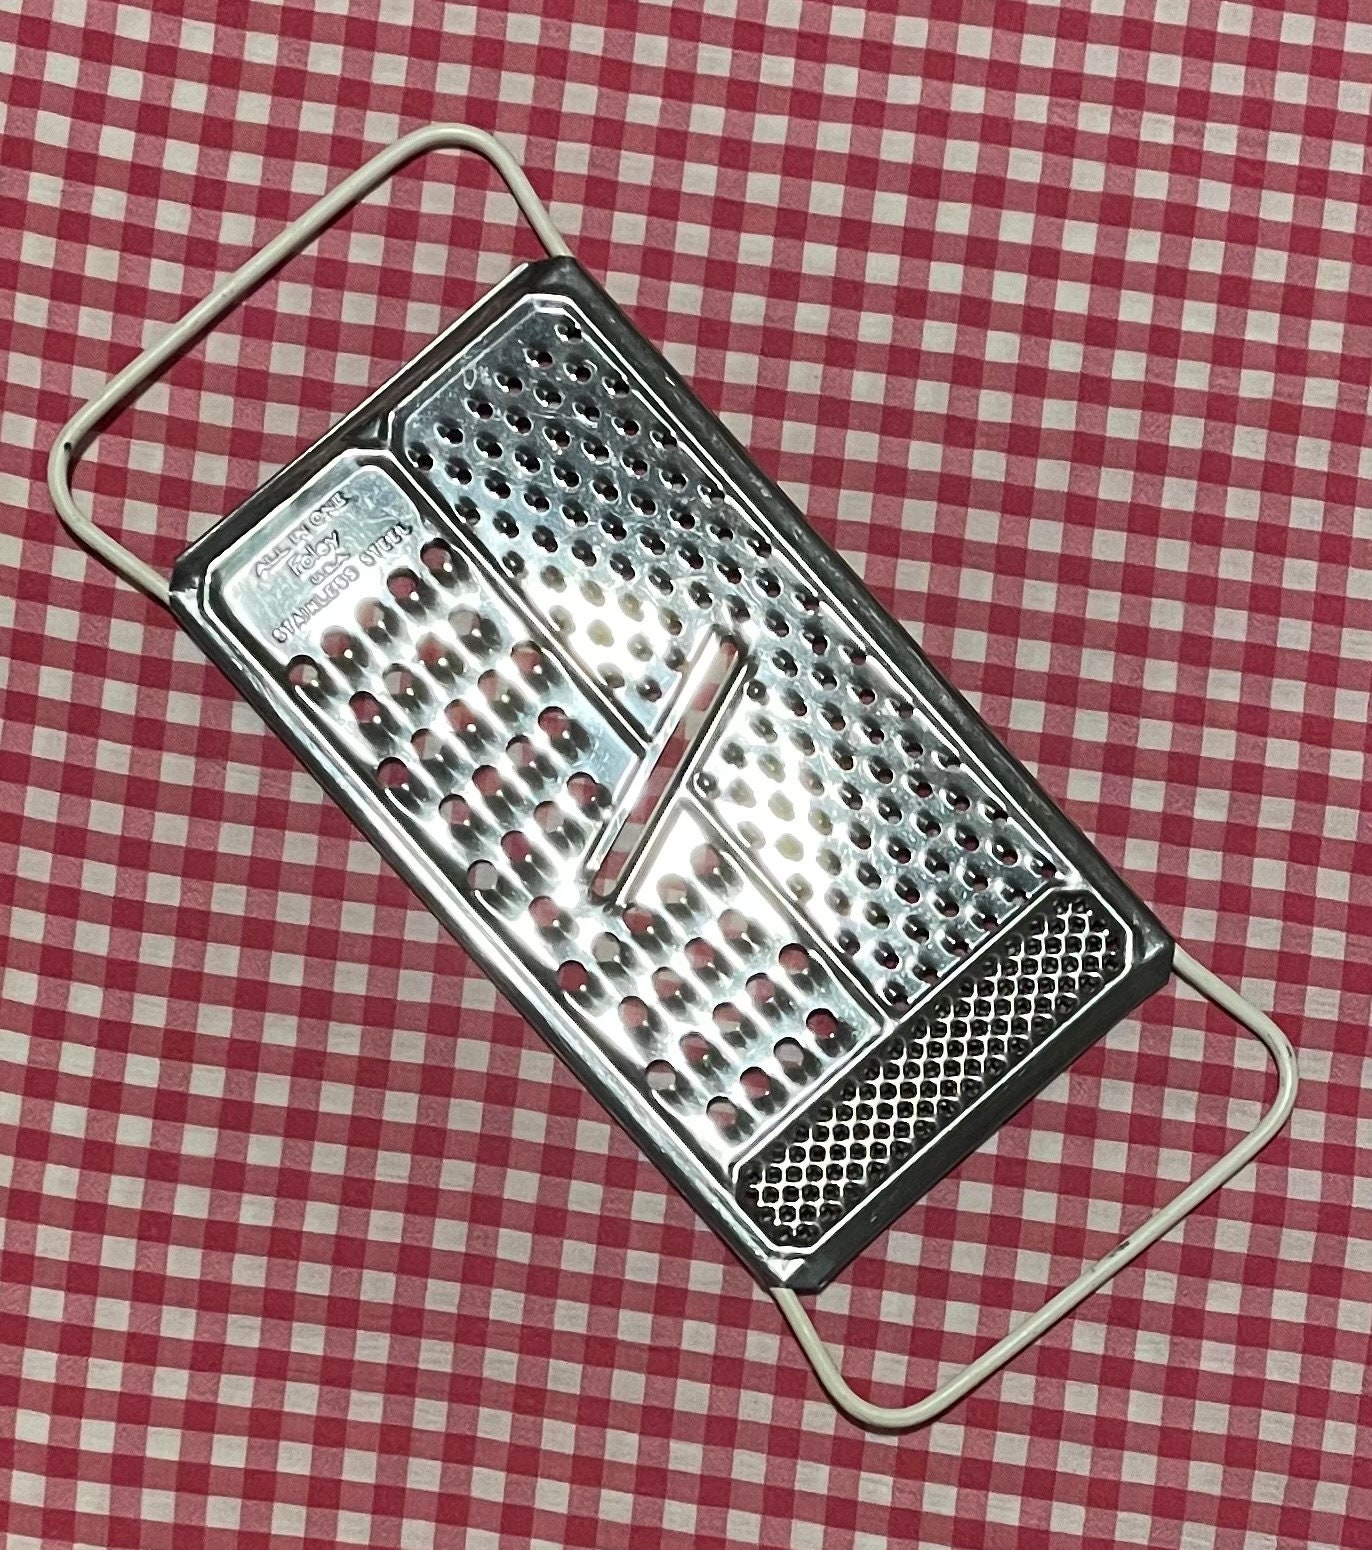 Custom Engraved Cheese Grater, Hand Grater, Graters Gonna Grate, Zester